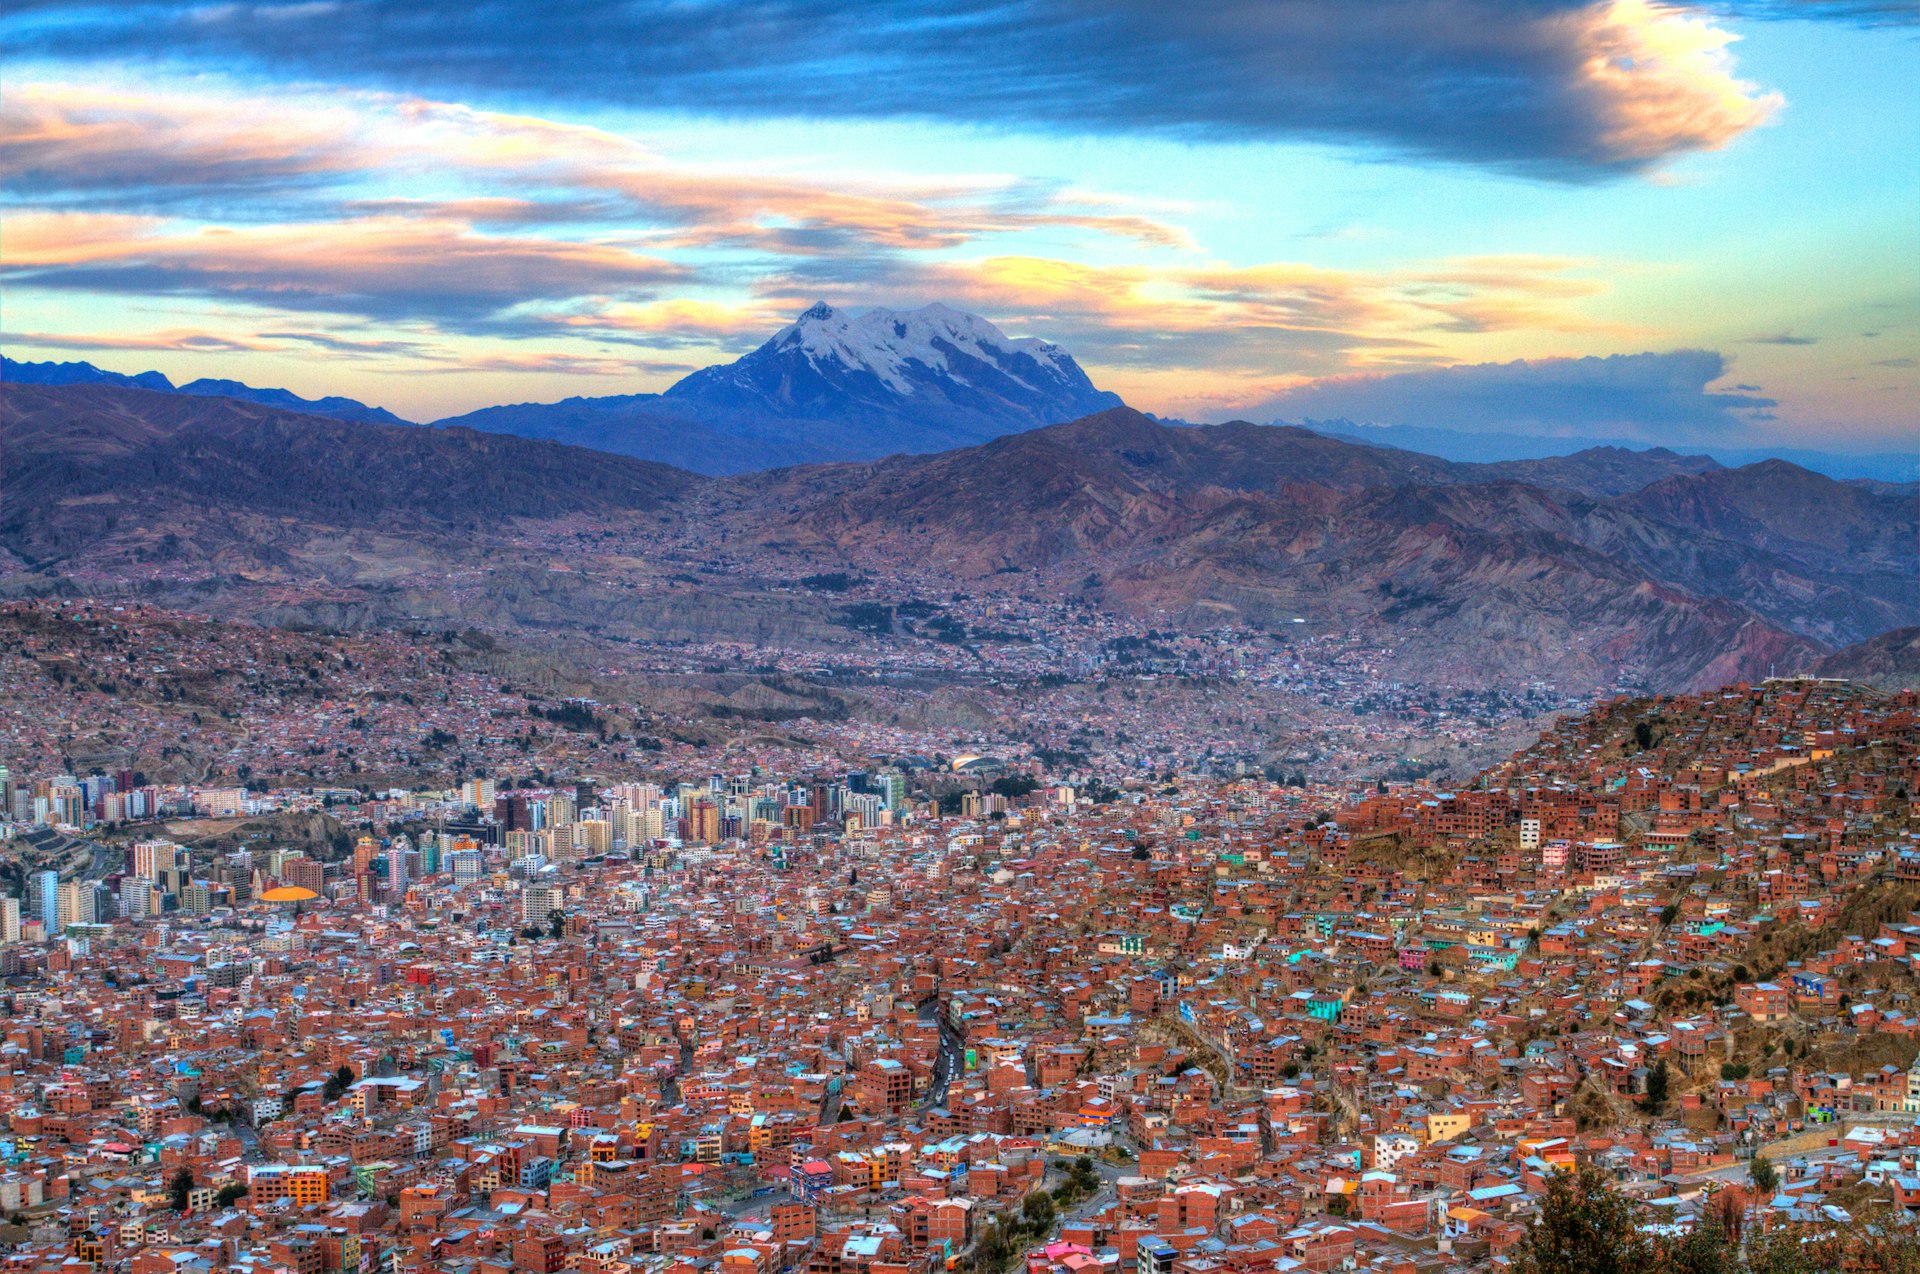 The huge expanse of La Paz, all red buildings and tower blocks, stretching across a high plateau with mountain peaks and a vivid sunset in the distance.